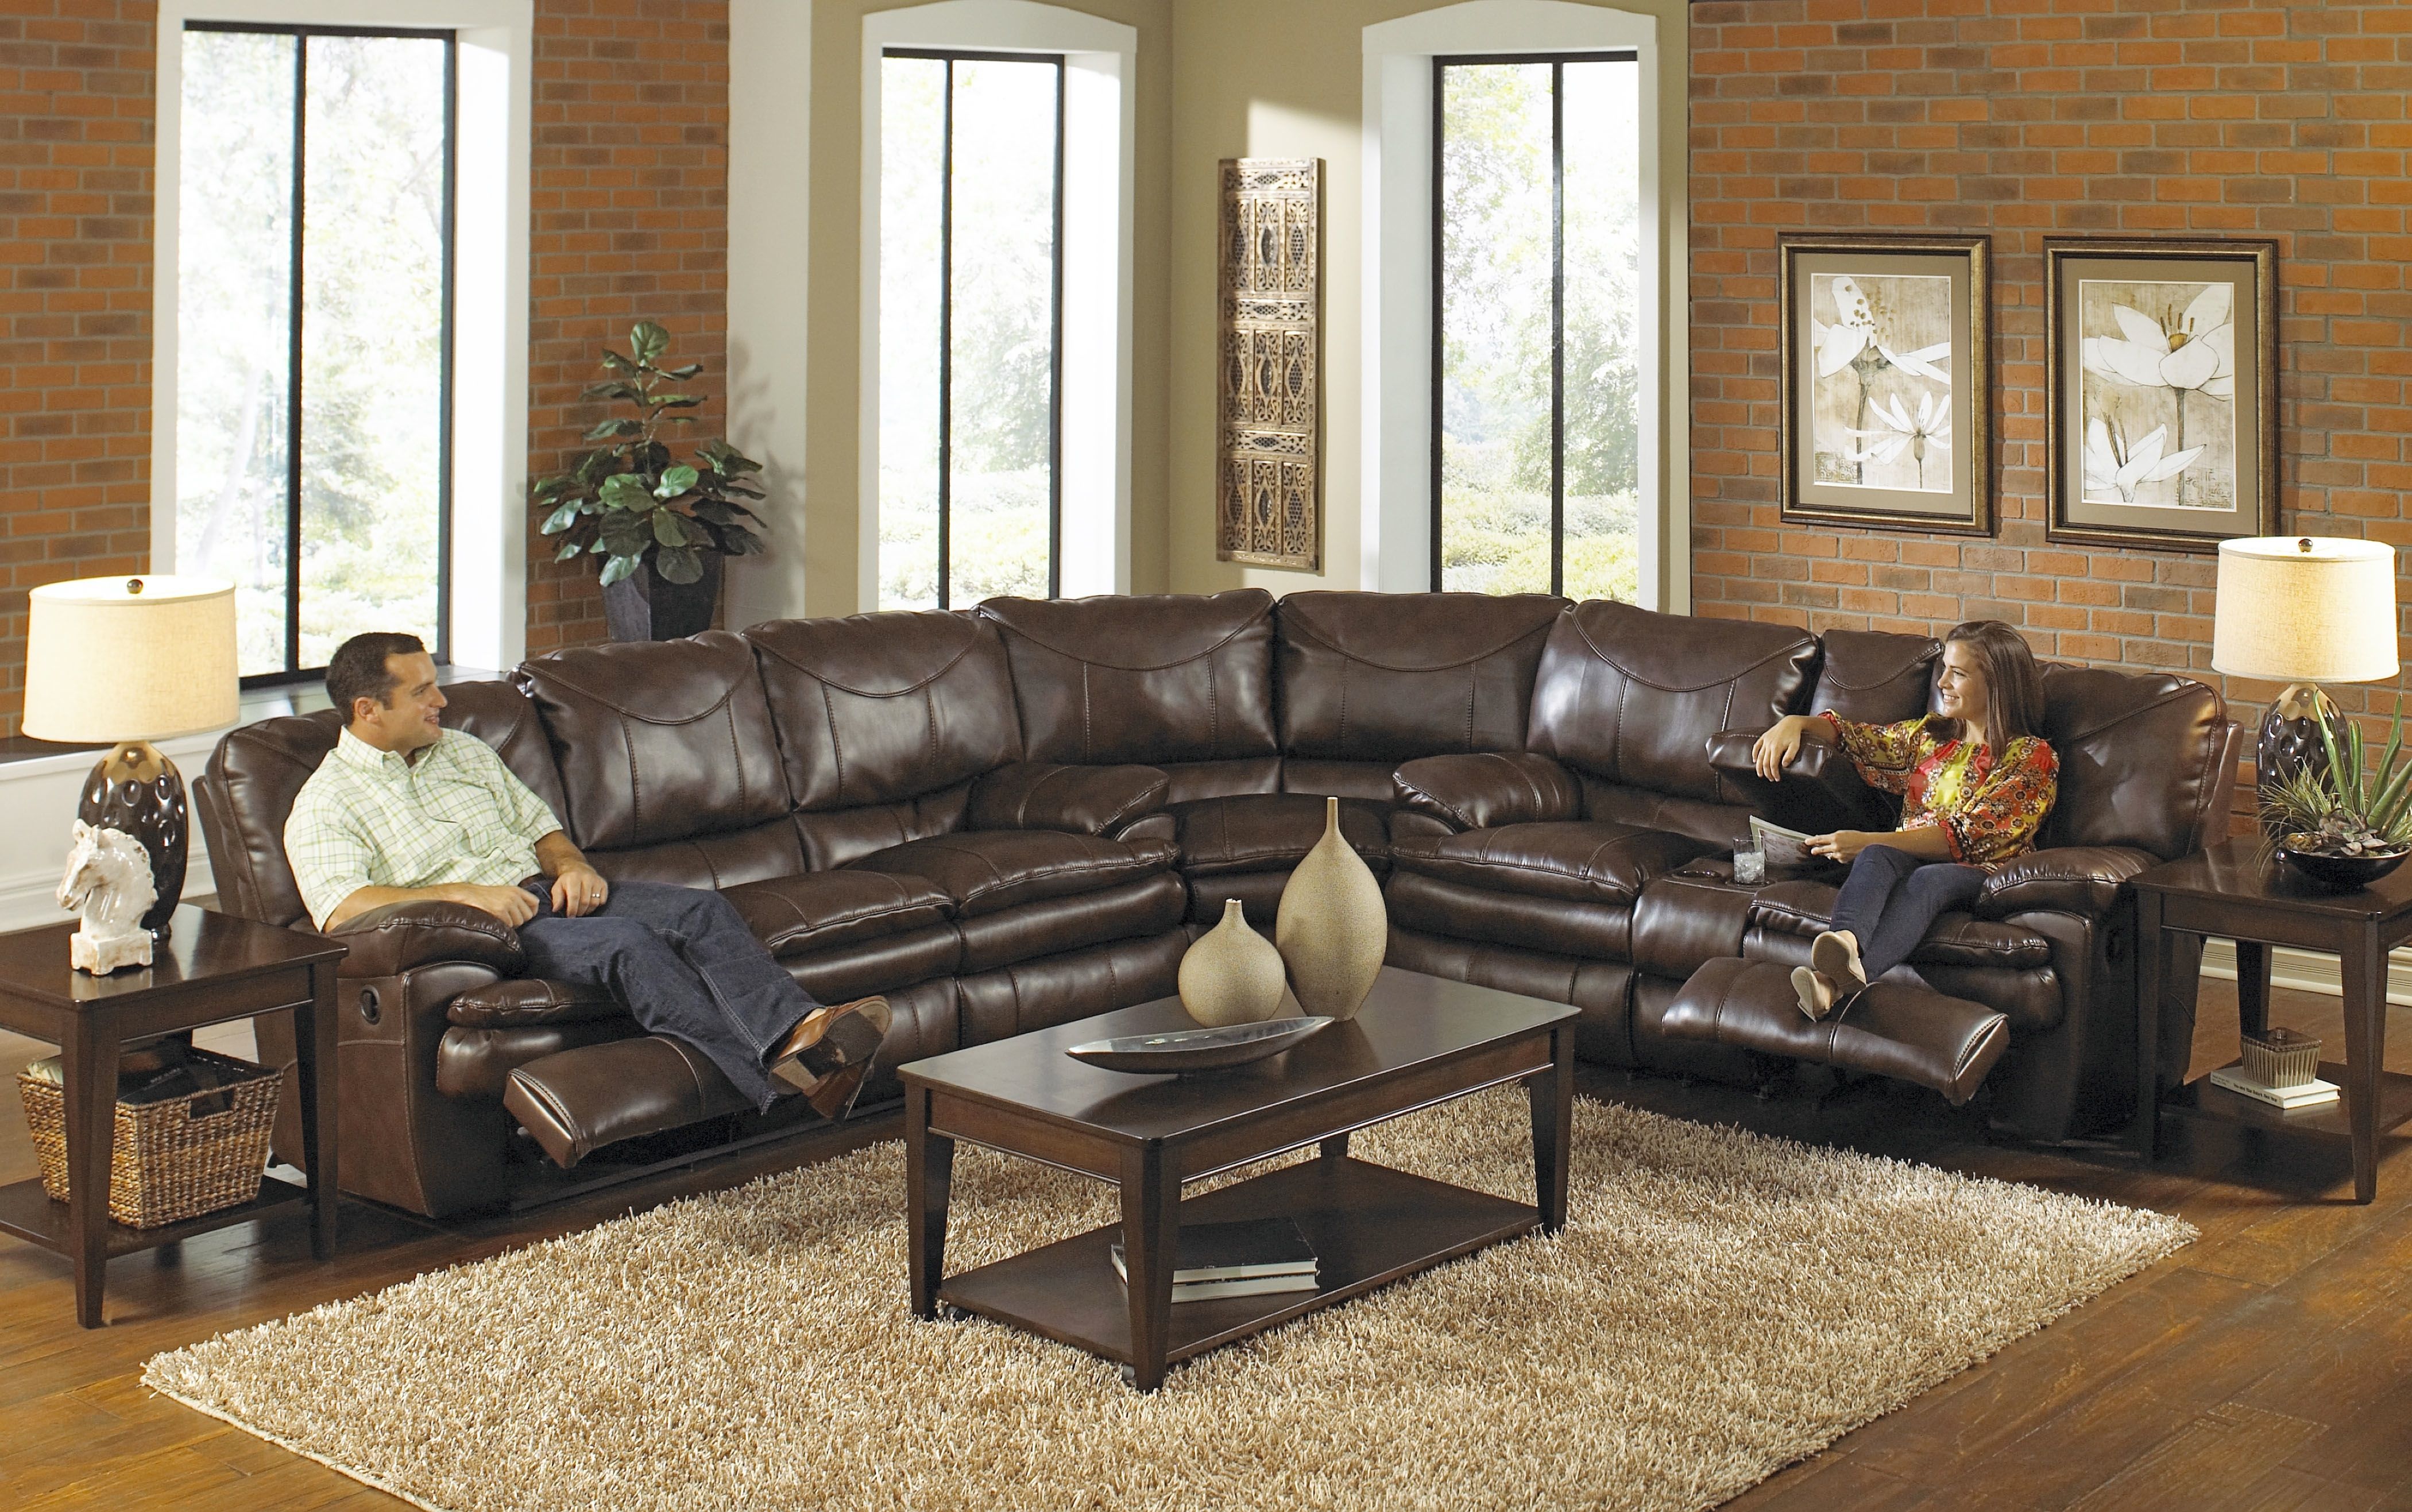 Epic High Quality Sectional Sofa 21 With Additional Modern Sofa Regarding High Quality Sectional Sofas (Photo 5 of 10)